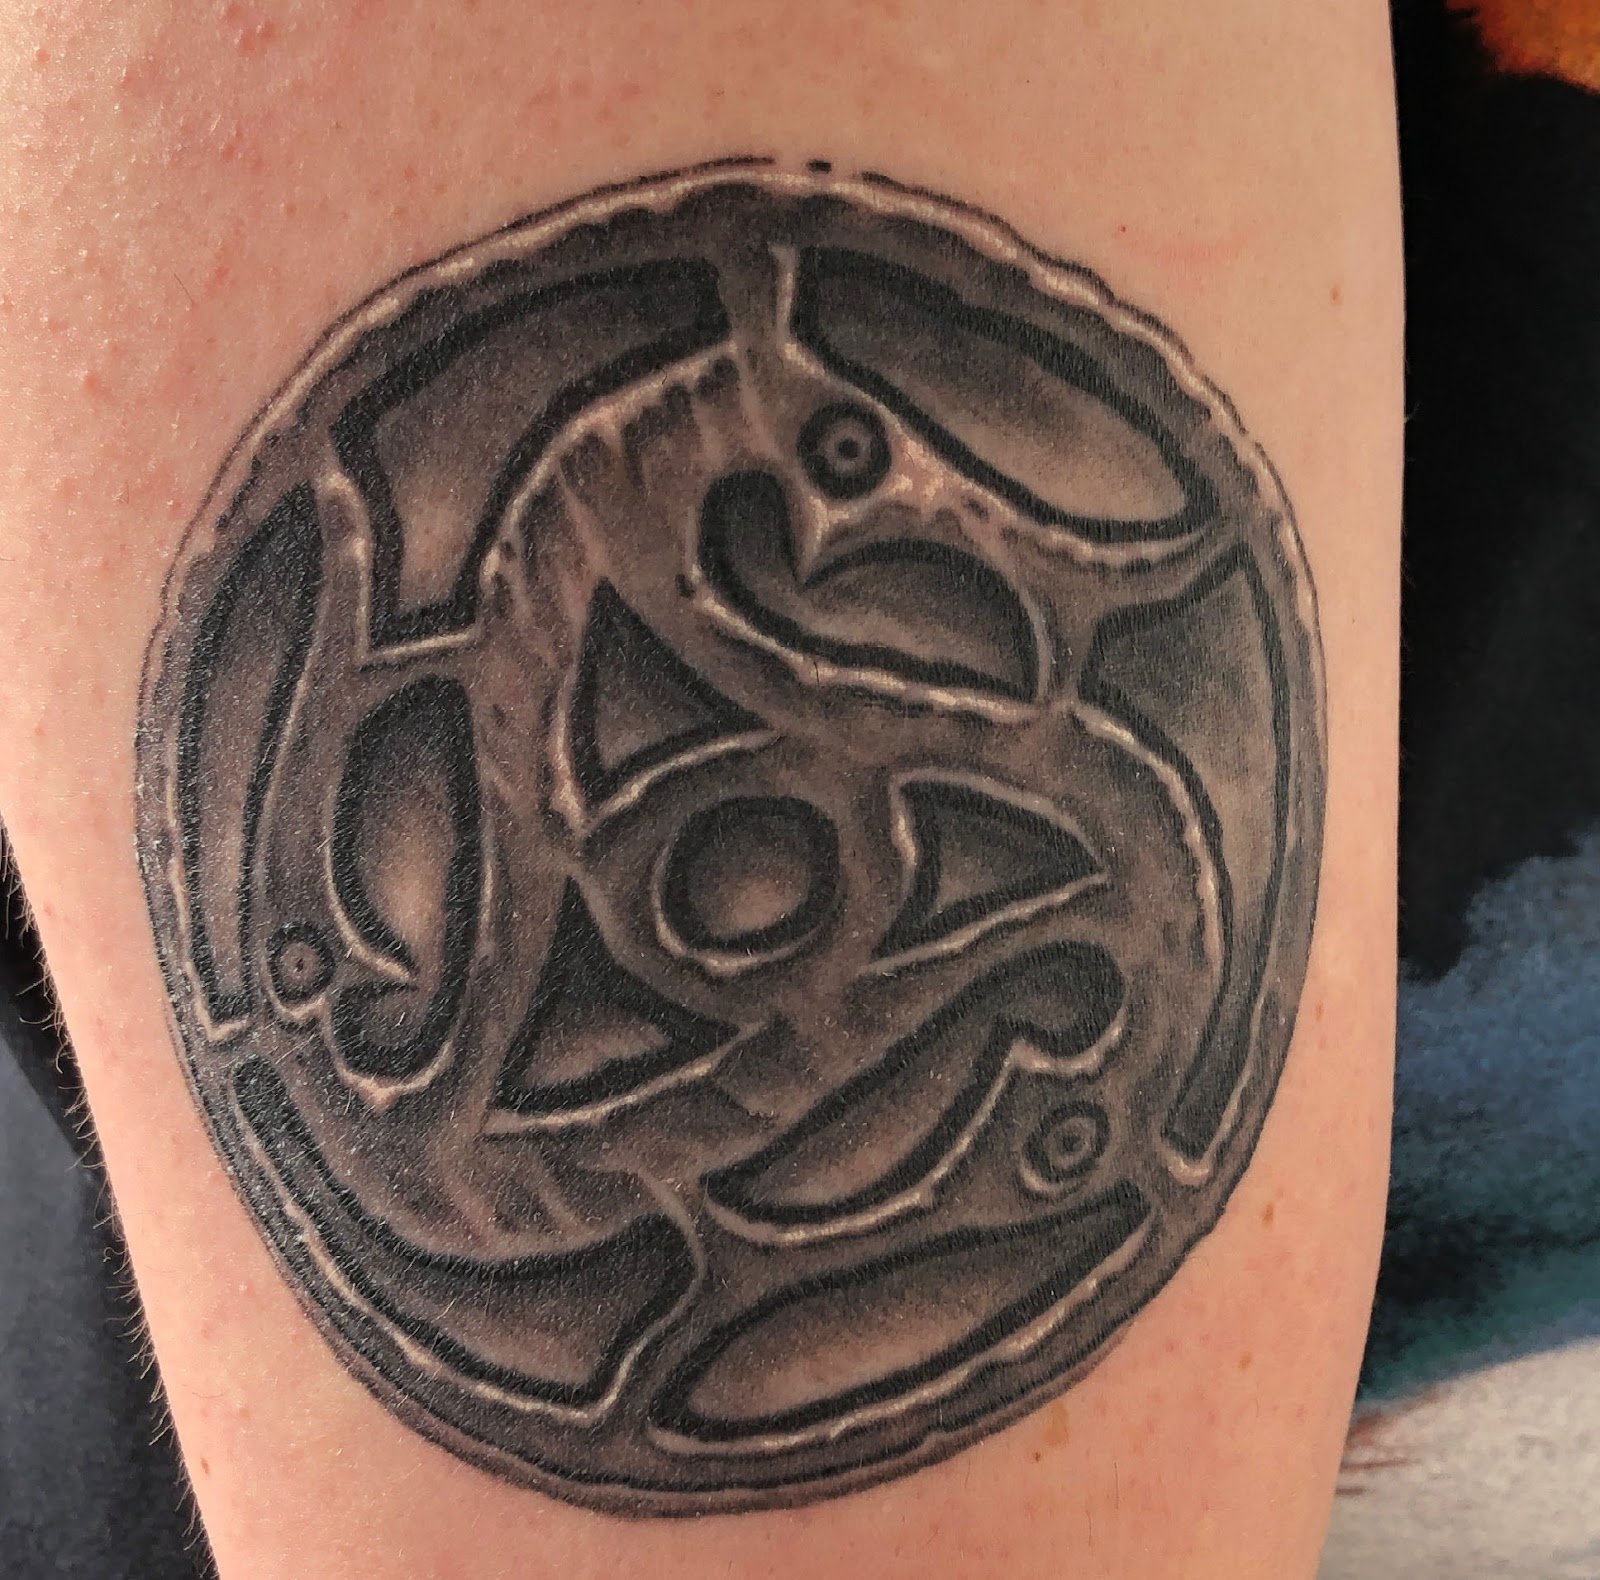 What is the meaning of a Celtic knot tattoo? - Quora